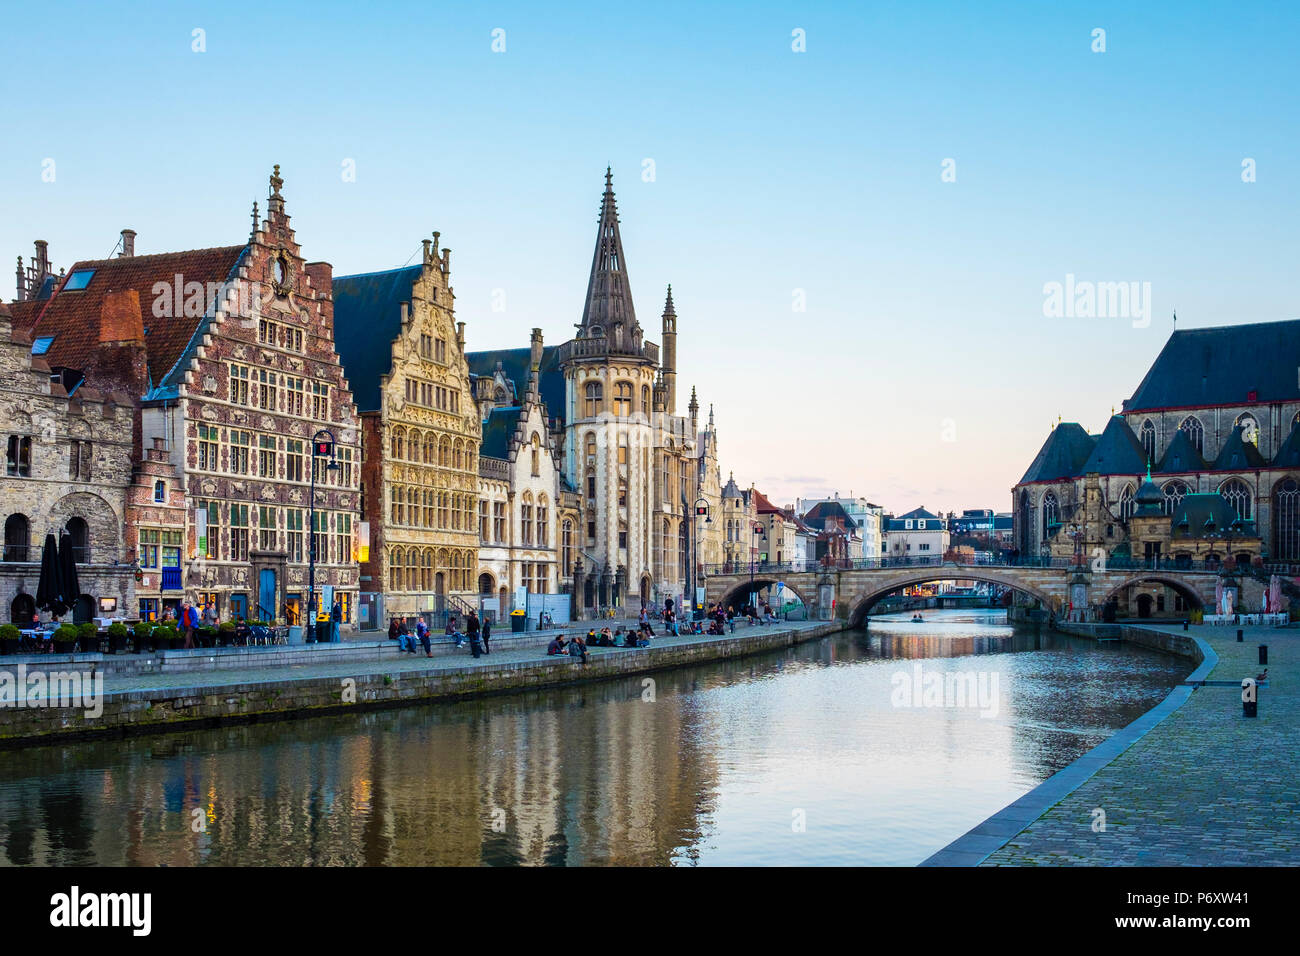 Belgium, Flanders, Ghent (Gent). The Leie River and buildings along Graslei quay at dusk. Stock Photo